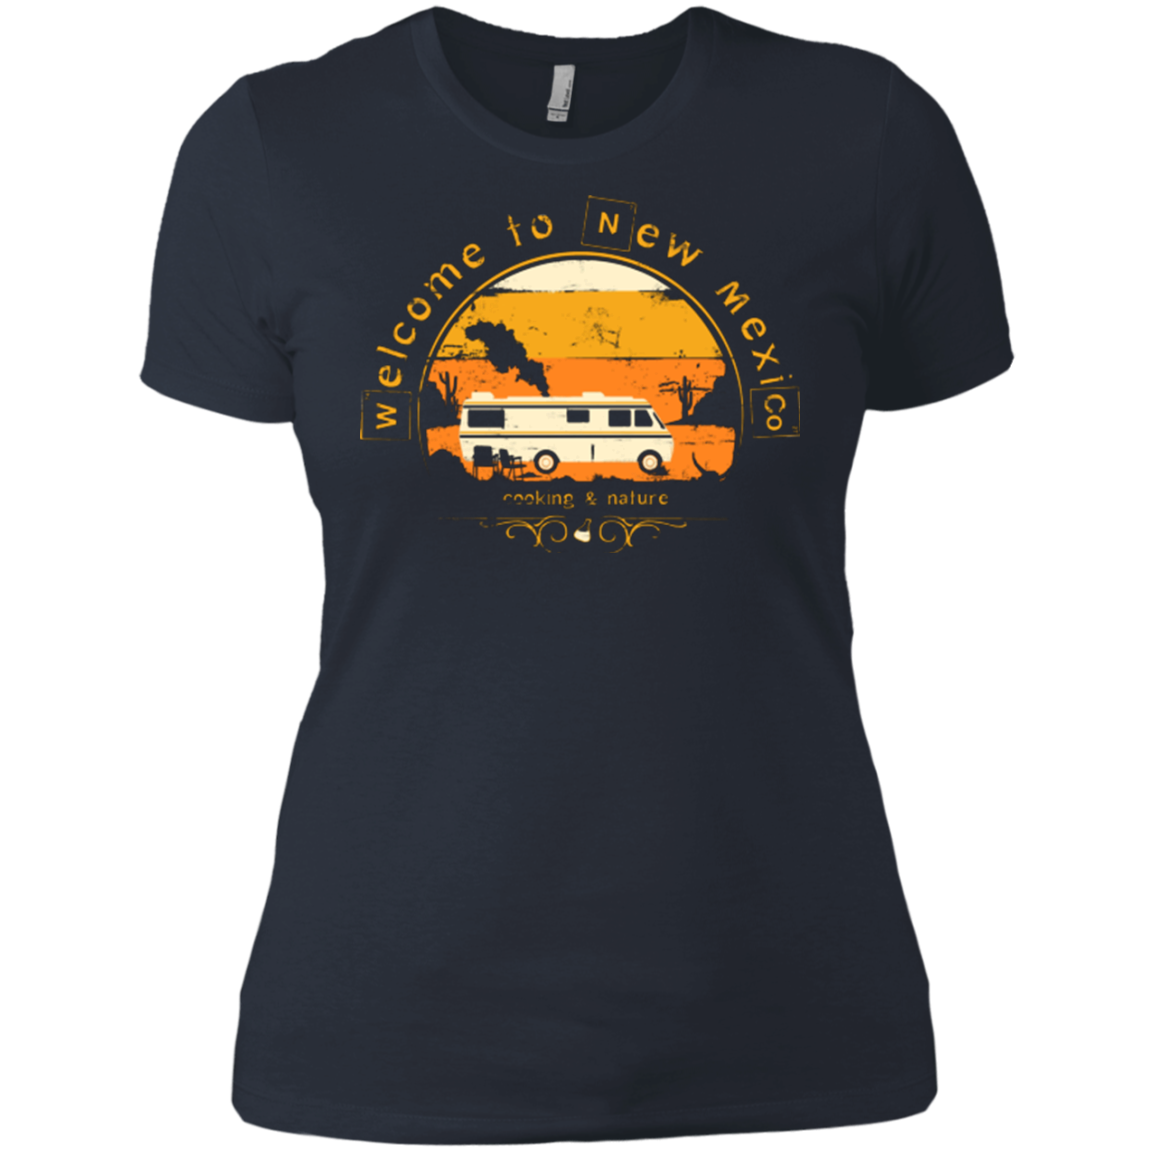 Welcome to New Mexico Women's Premium T-Shirt